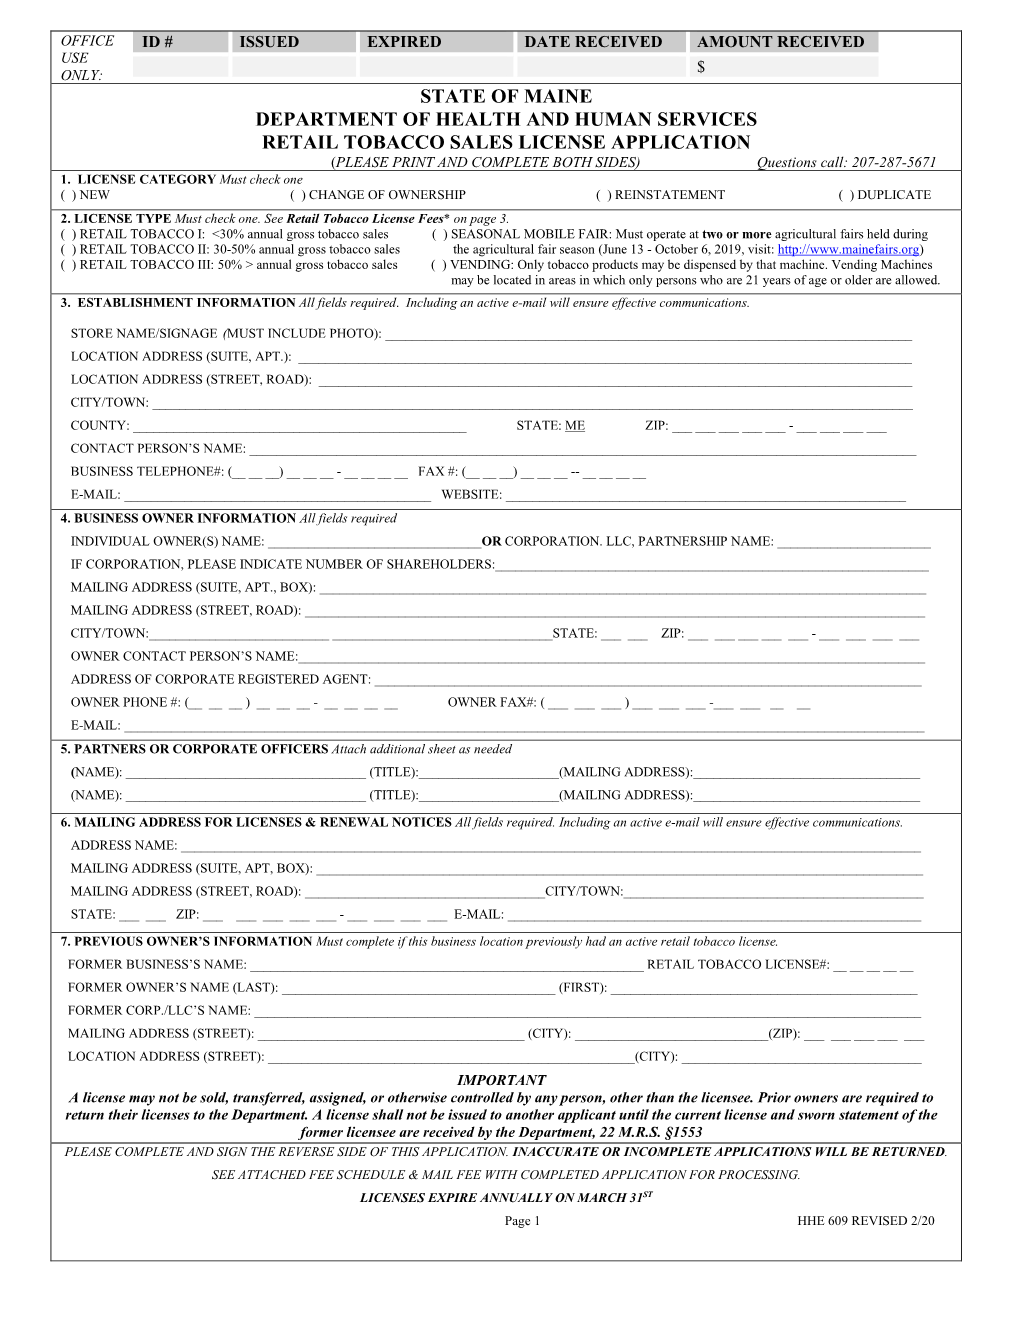 STATE of MAINE DEPARTMENT of HEALTH and HUMAN SERVICES RETAIL TOBACCO SALES LICENSE APPLICATION (PLEASE PRINT and COMPLETE BOTH SIDES) Questions Call: 207-287-5671 1